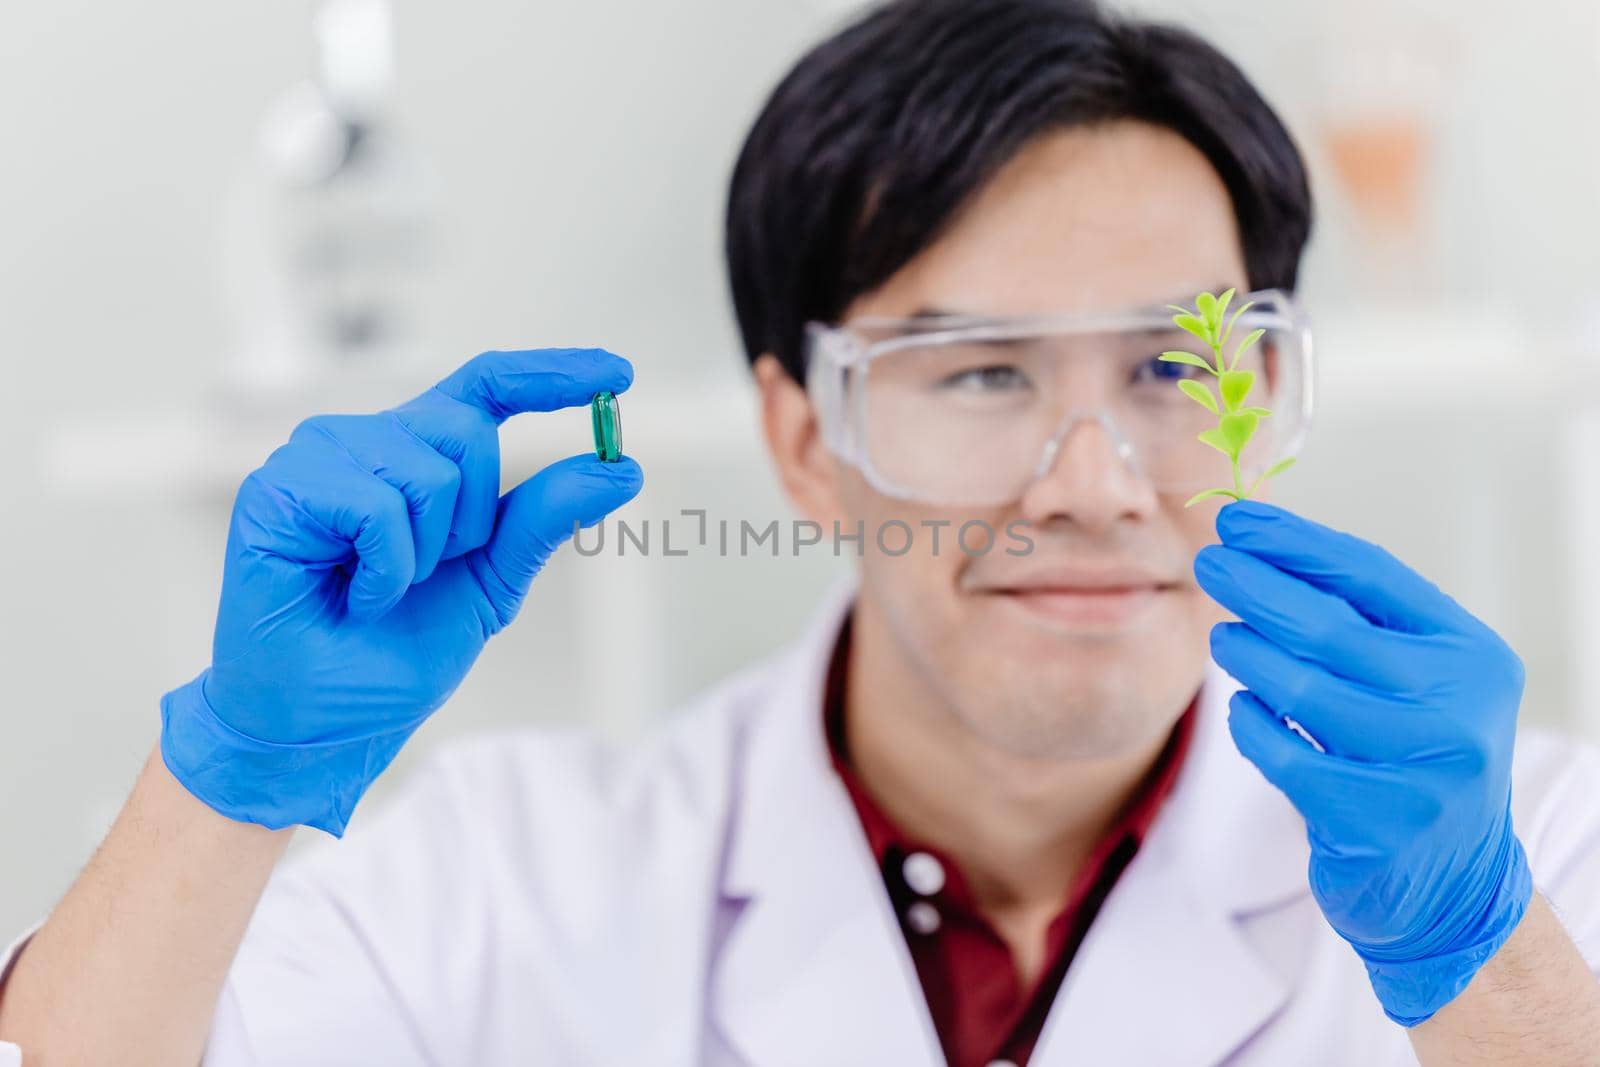 Scientist doctor extract medicine from natural plant leaf in medical lab. green medication from nature concept. by qualitystocks